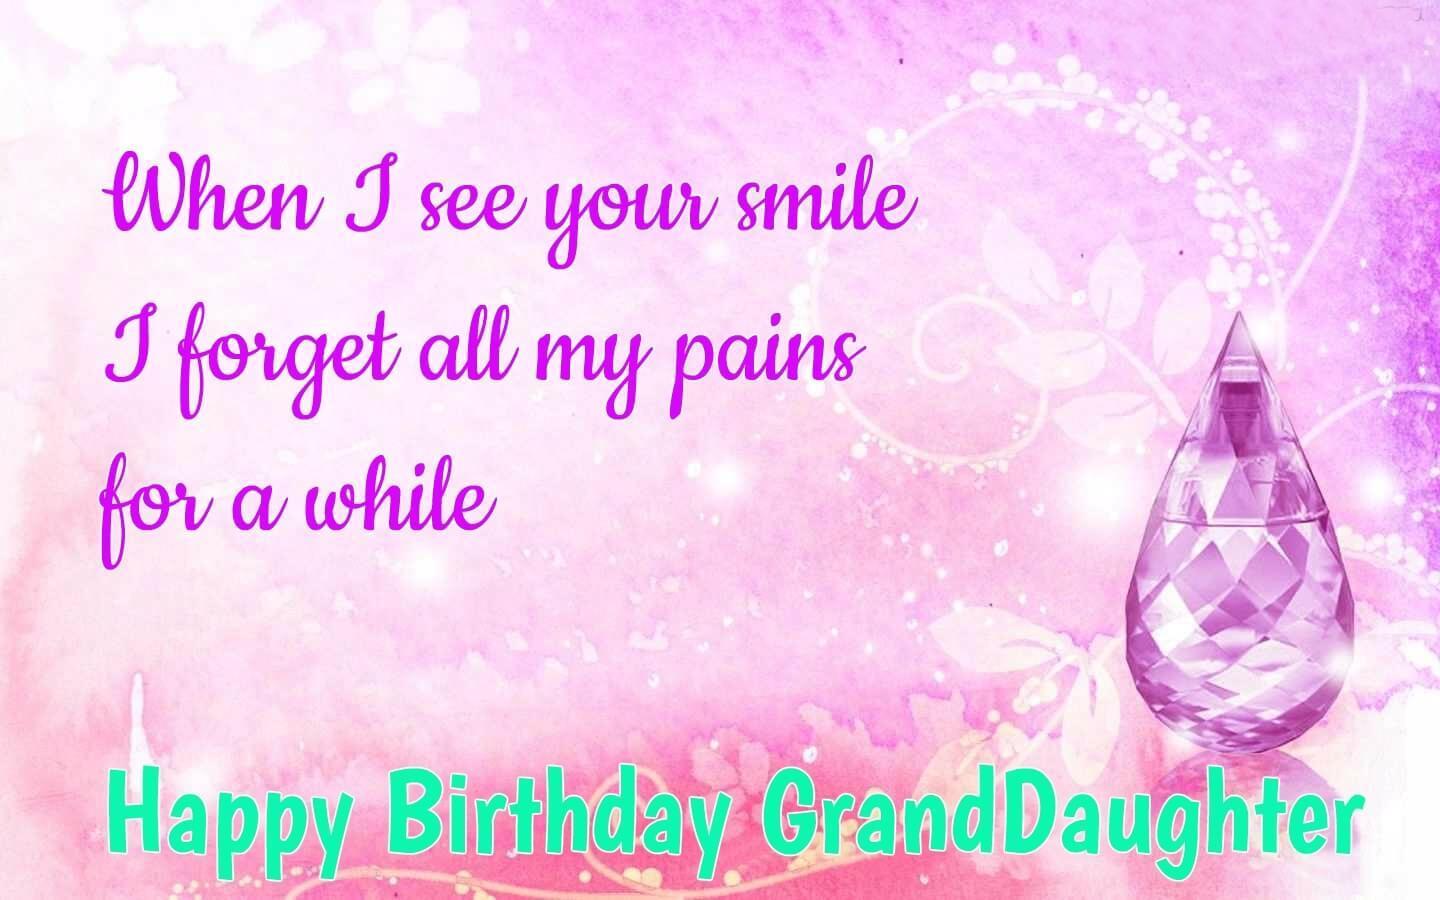 Happy Birthday Wishes for Granddaughter